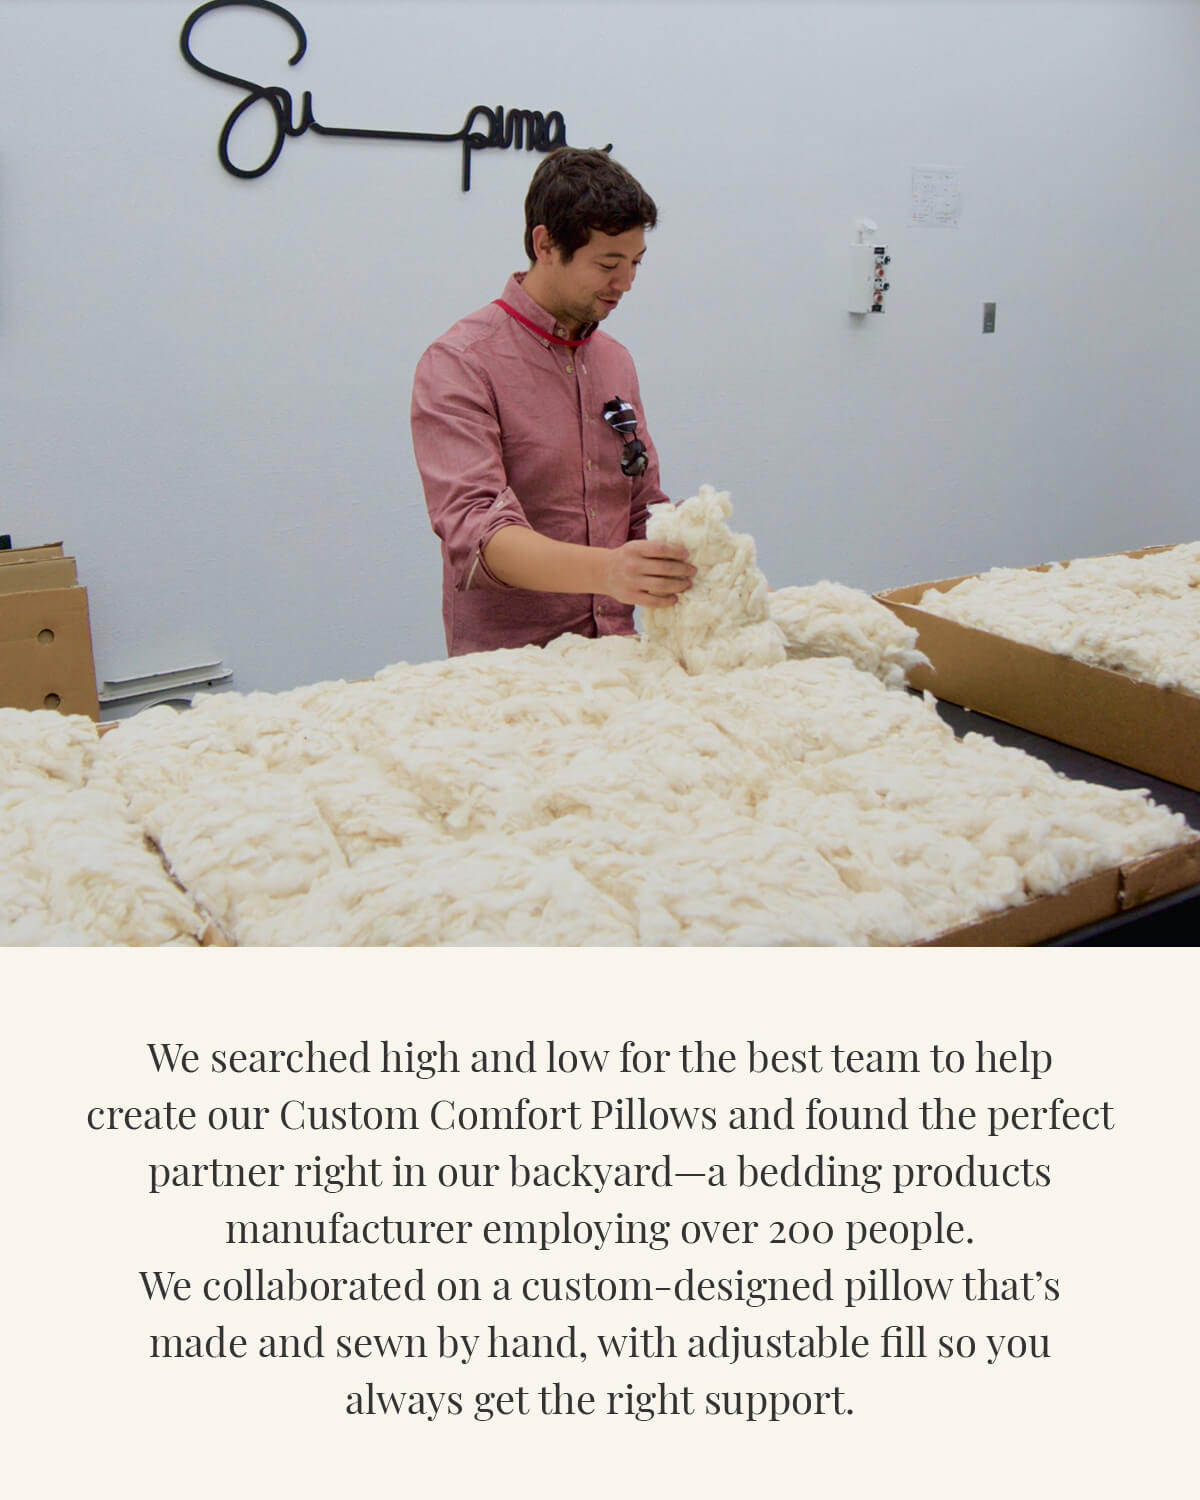 We searched high and low for the best team to help create our Custom Comfort Pillows